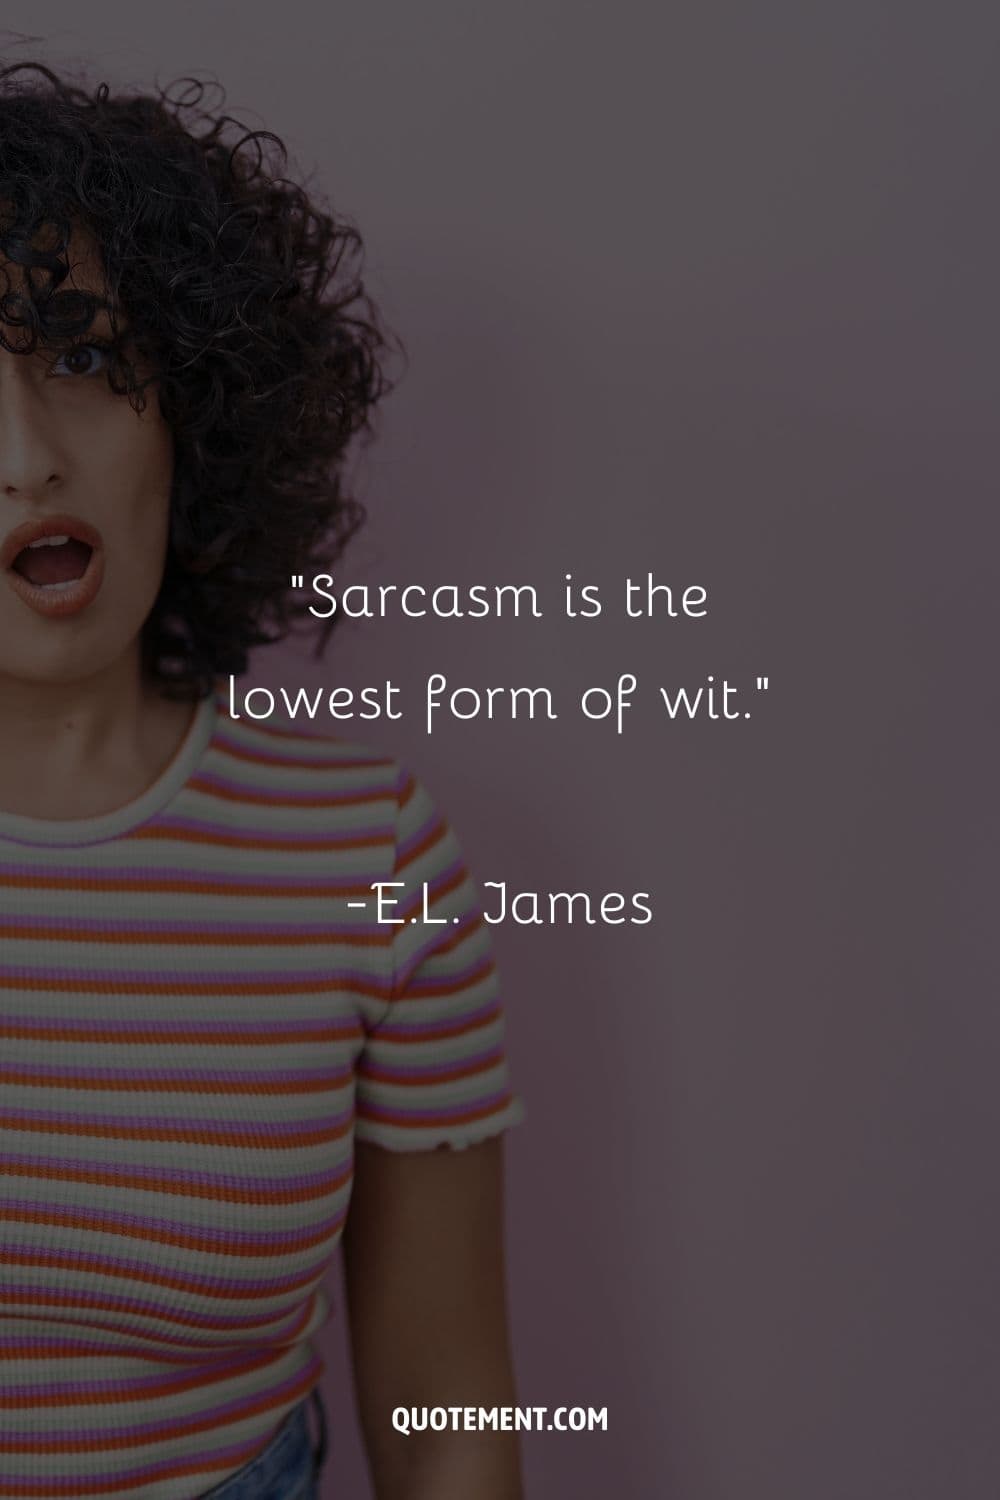 “Sarcasm is the lowest form of wit.” ― E.L. James, Fifty Shades Darker